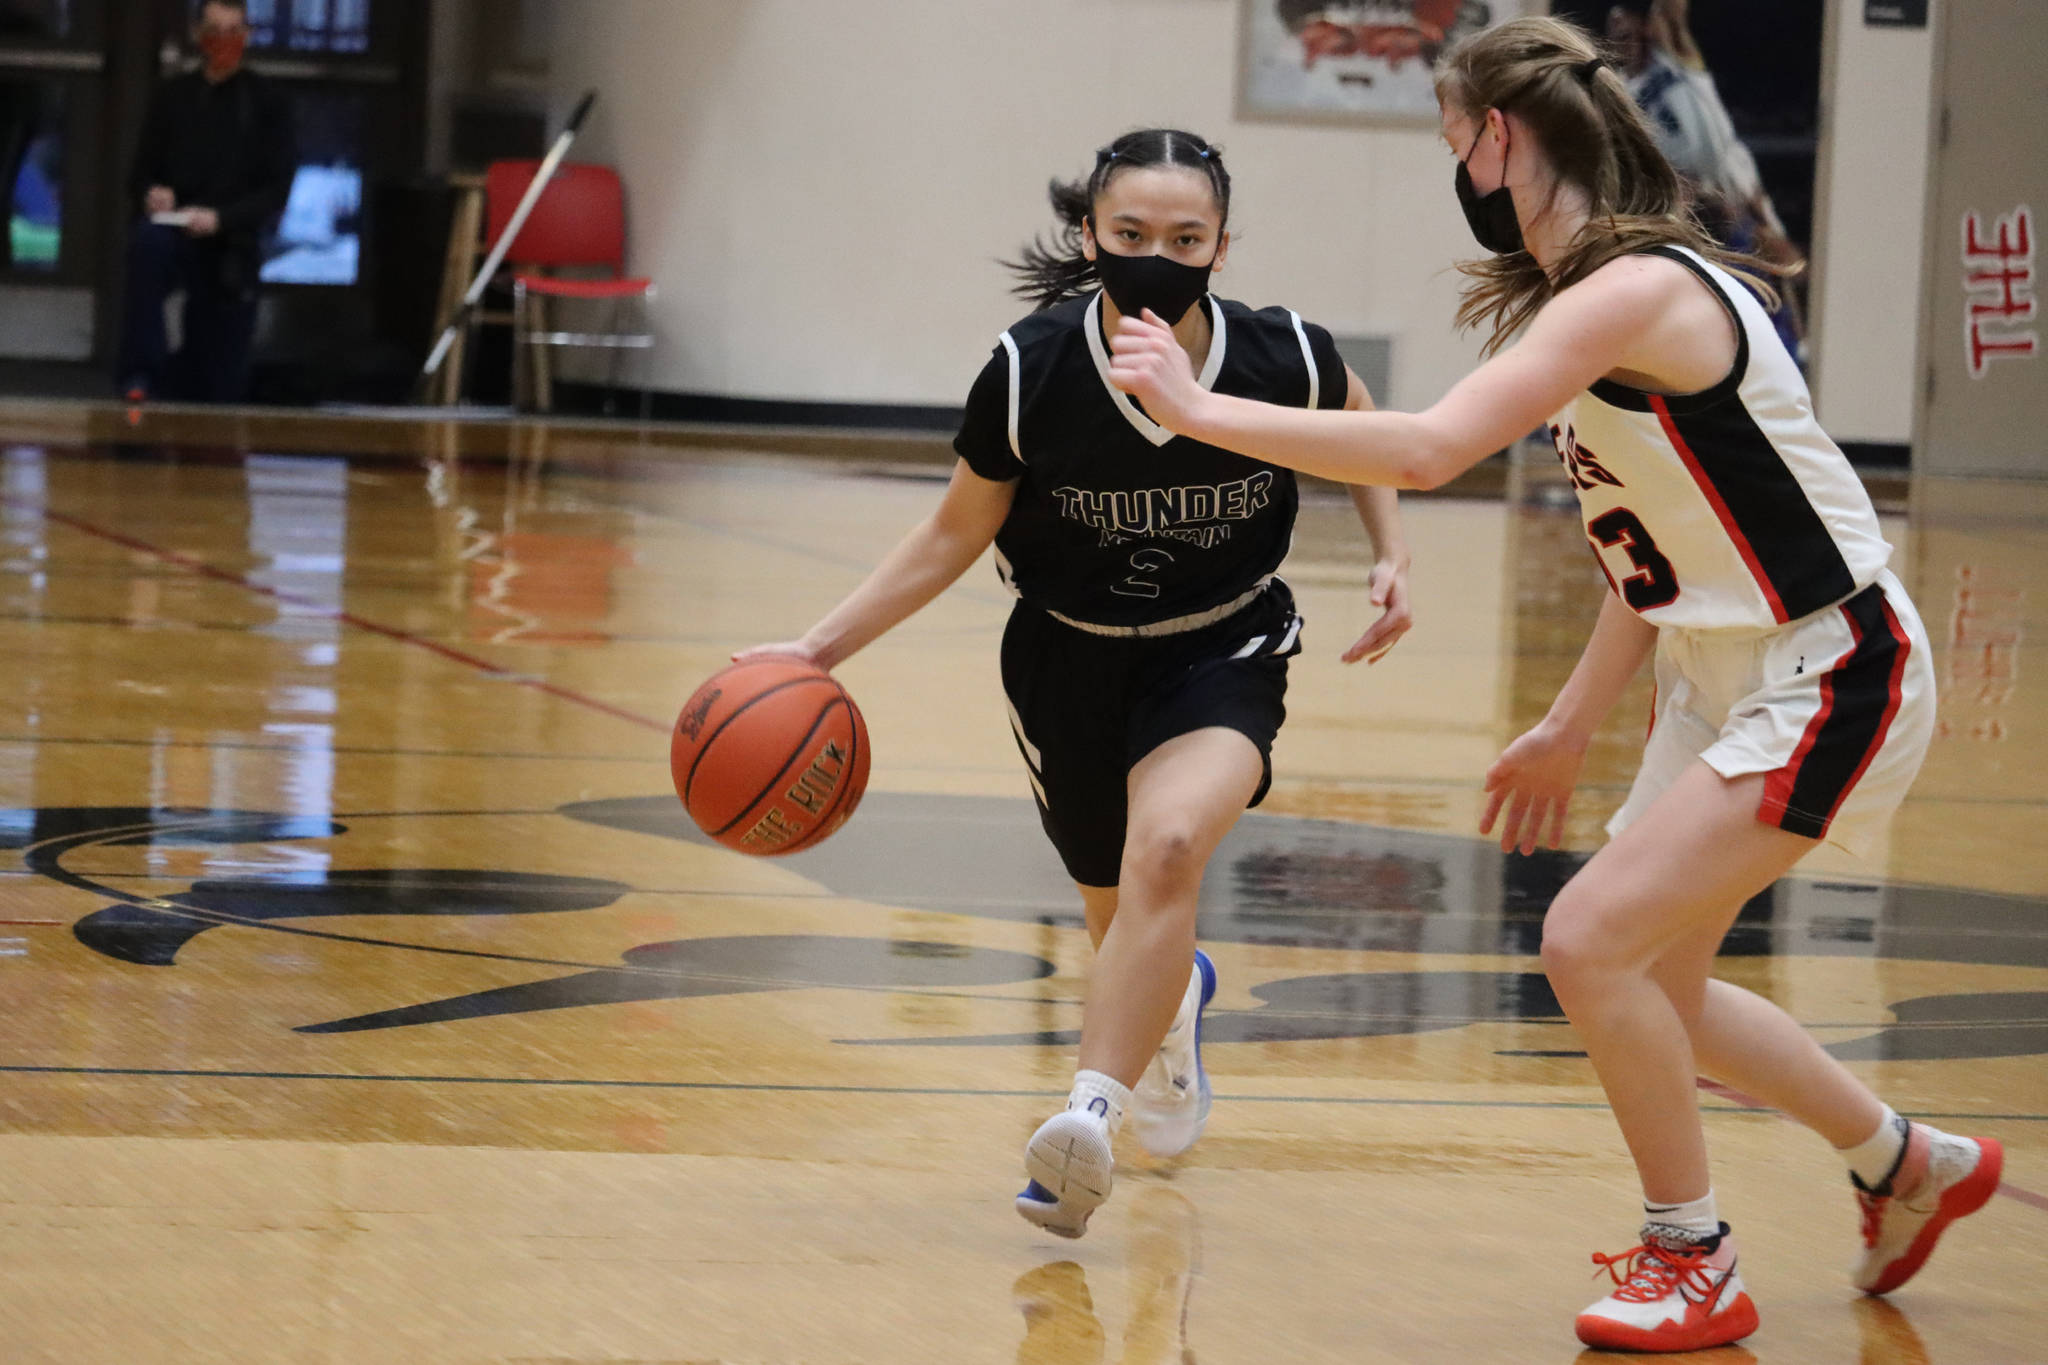 Thunder Mountain High School’s Mary Khaye Garcia (2) dribbles toward Juneau-Douglas High School: Yadaa.at Kalé’s Skylar Tuckwood (13) during a 46-41 TMHS victory. It took four quarters and two overtime periods to determine which team would go on to face Ketchikan High School in Ketchikan. (Ben Hohenstatt / Juneau Empire)